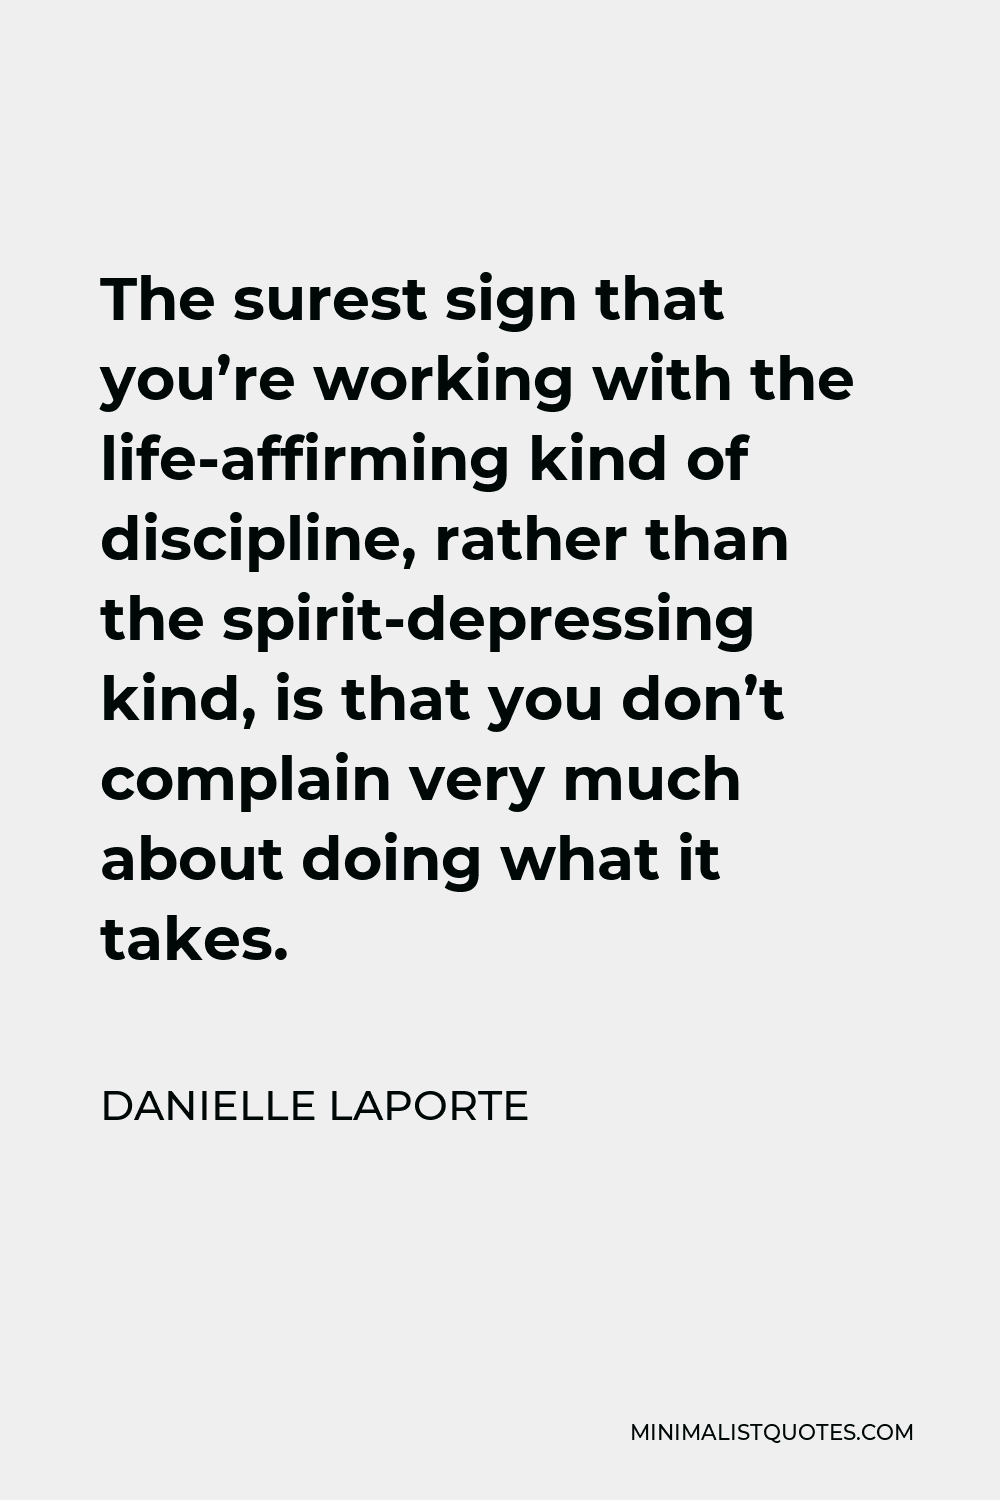 Danielle LaPorte Quote - The surest sign that you’re working with the life-affirming kind of discipline, rather than the spirit-depressing kind, is that you don’t complain very much about doing what it takes.